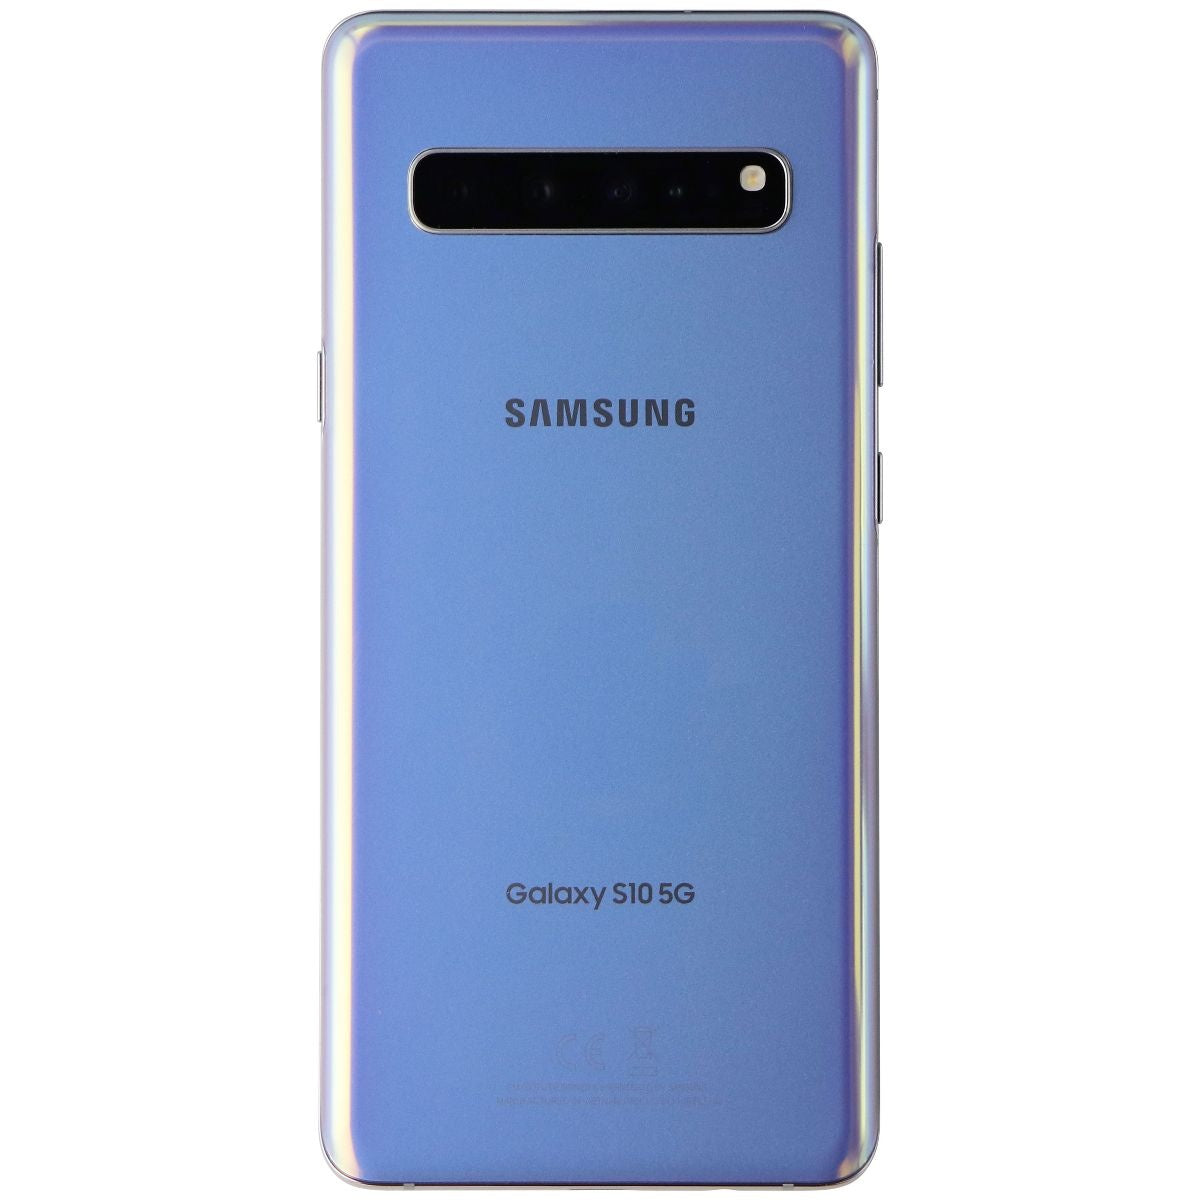 Samsung Galaxy S10 5G (SM-G977P) UNLOCKED - 256GB/Crown Silver **NO BLUETOOTH Cell Phones & Smartphones Samsung    - Simple Cell Bulk Wholesale Pricing - USA Seller